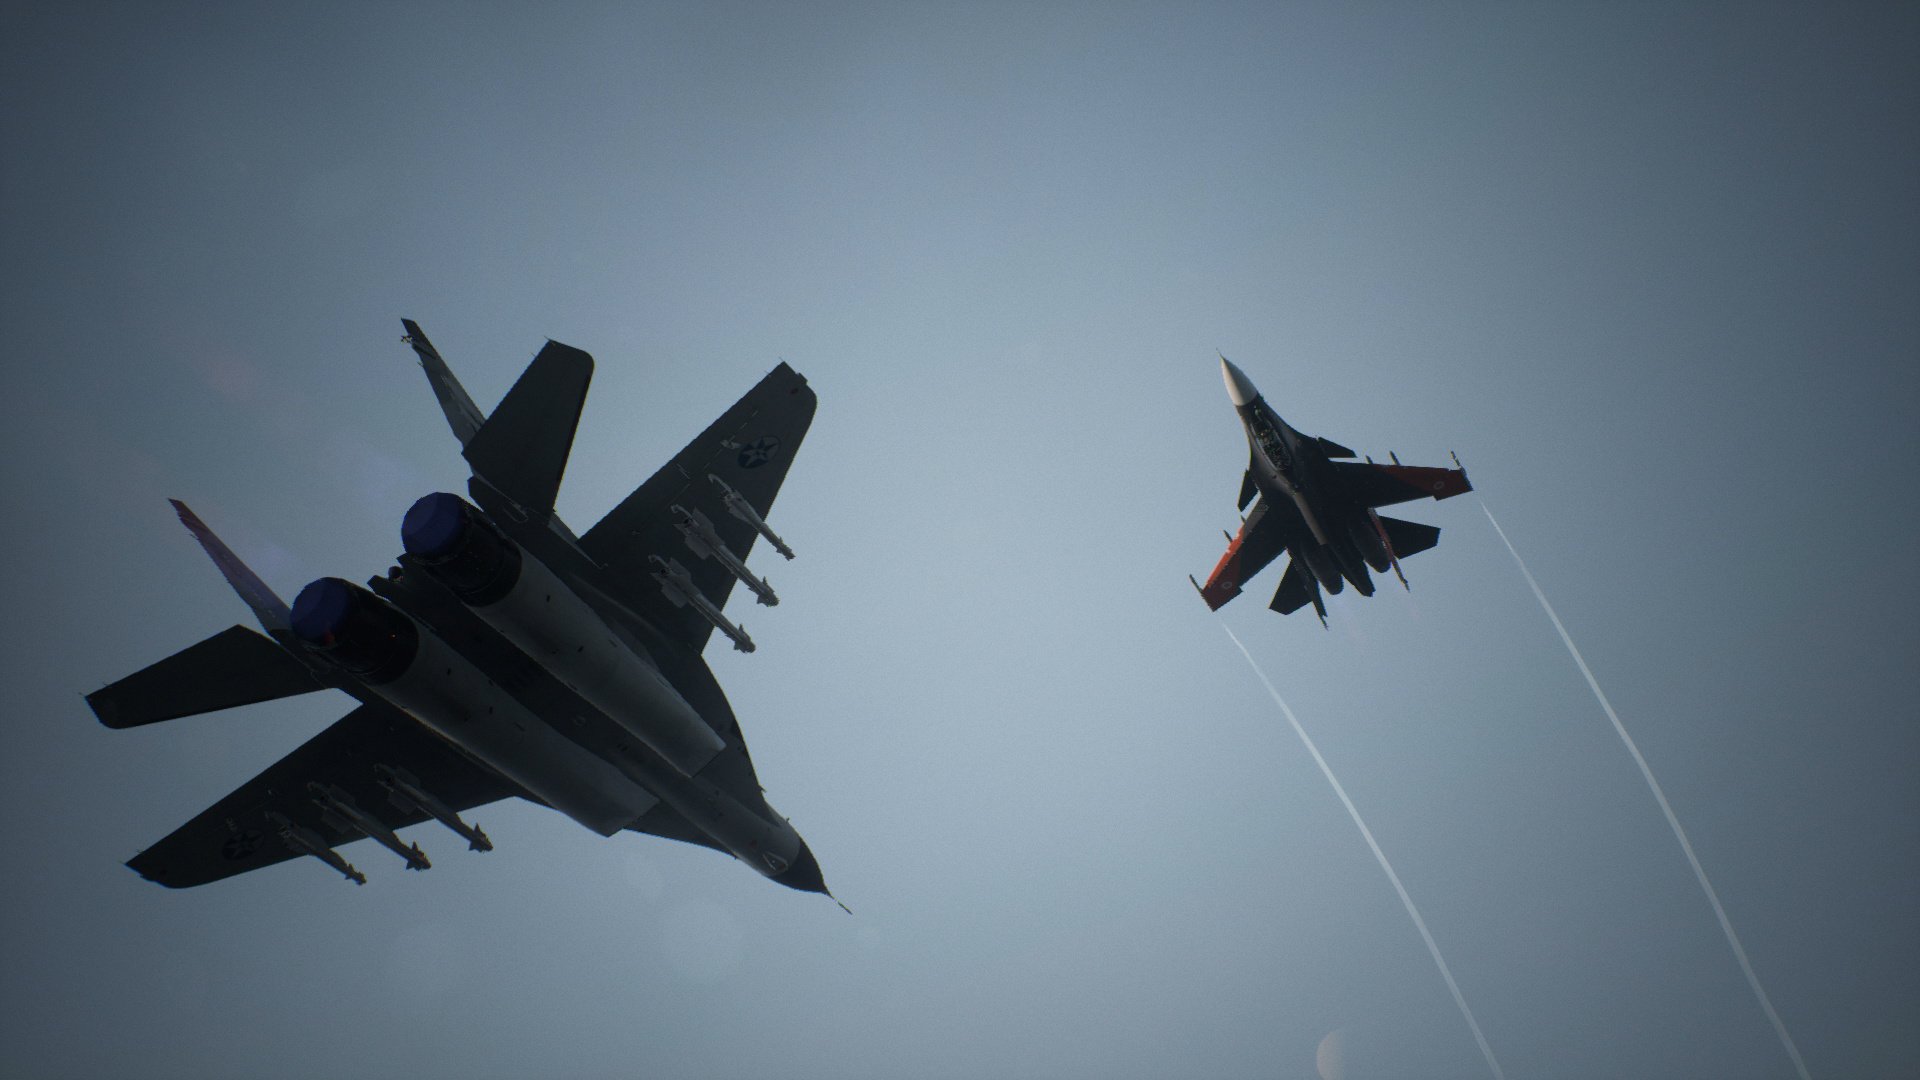 Ace Combat 7: Skies Unknown Review